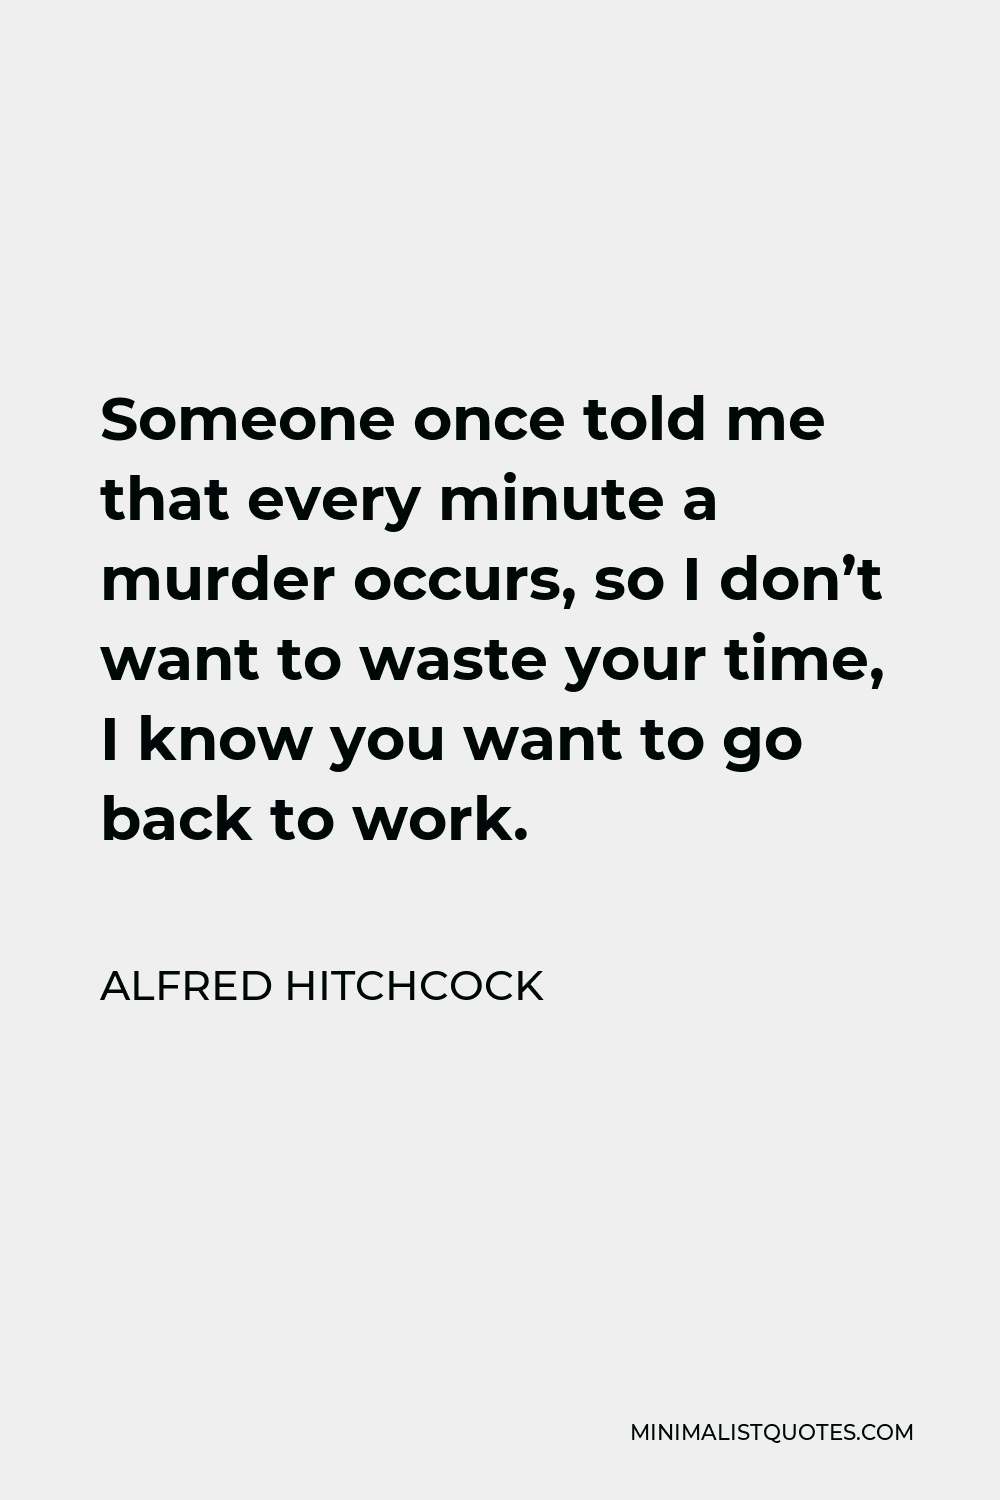 Alfred Hitchcock Quote - Someone once told me that every minute a murder occurs, so I don’t want to waste your time, I know you want to go back to work.